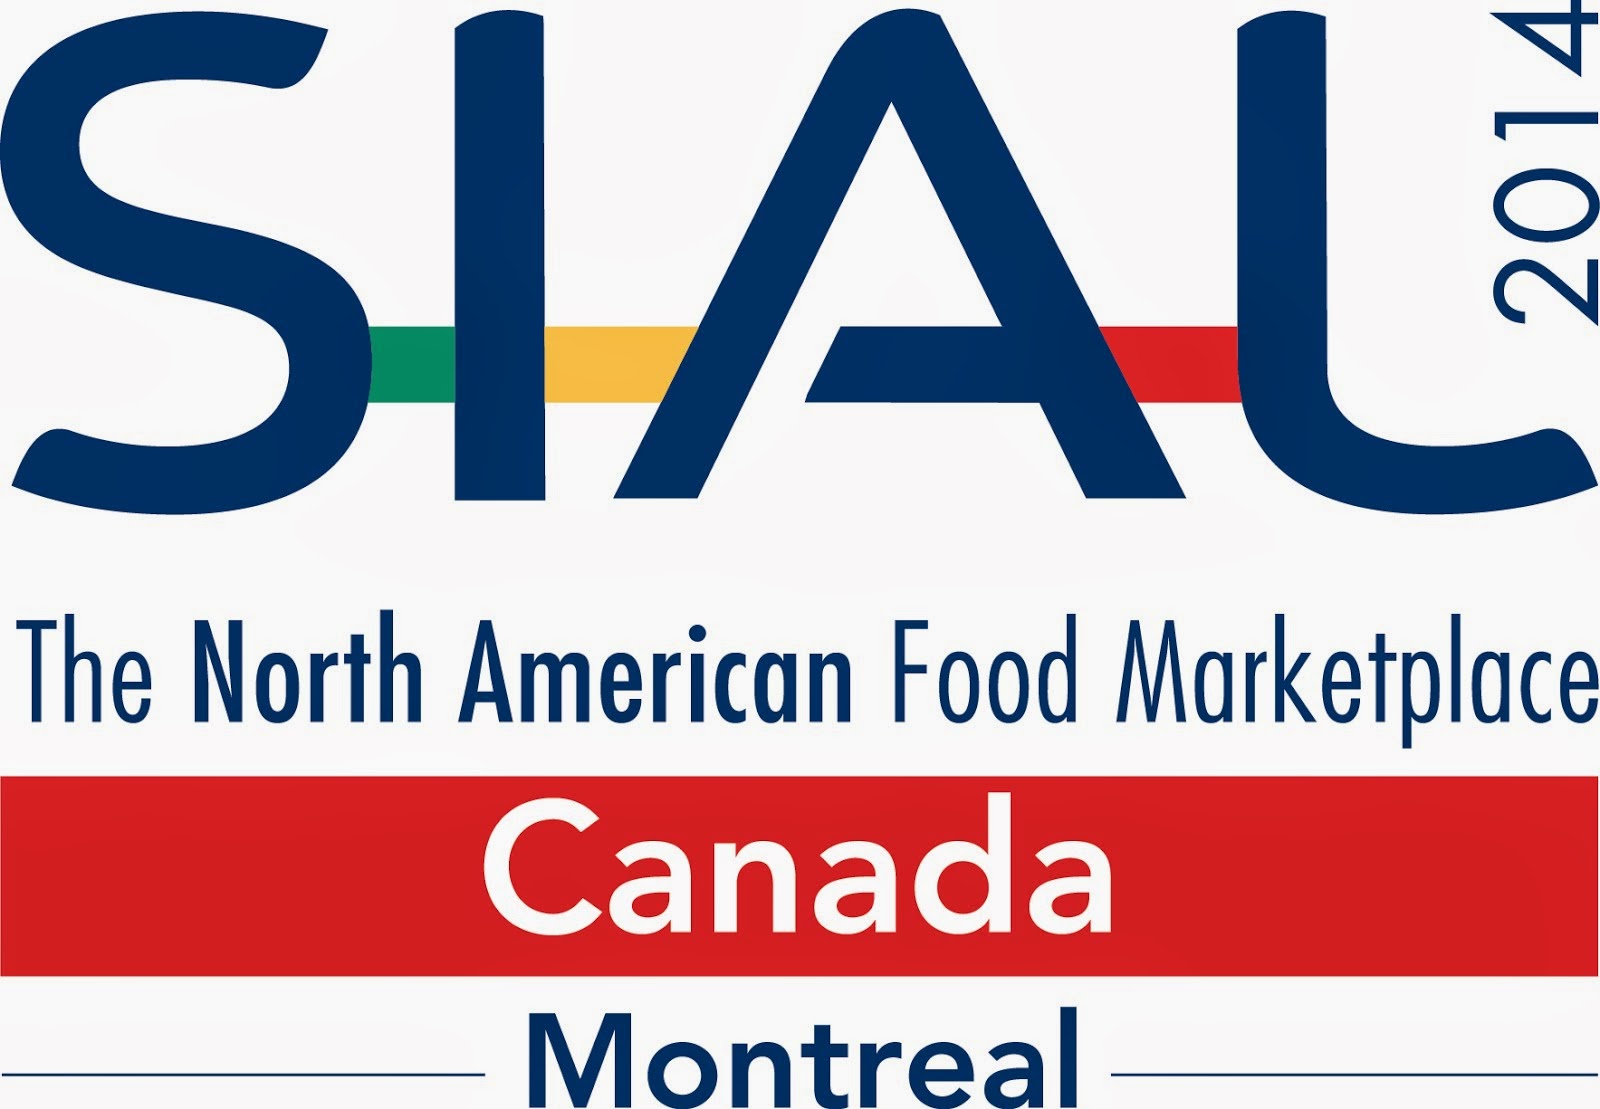 SIAL Canada 2014 - Click on the image to go to the SIAL website